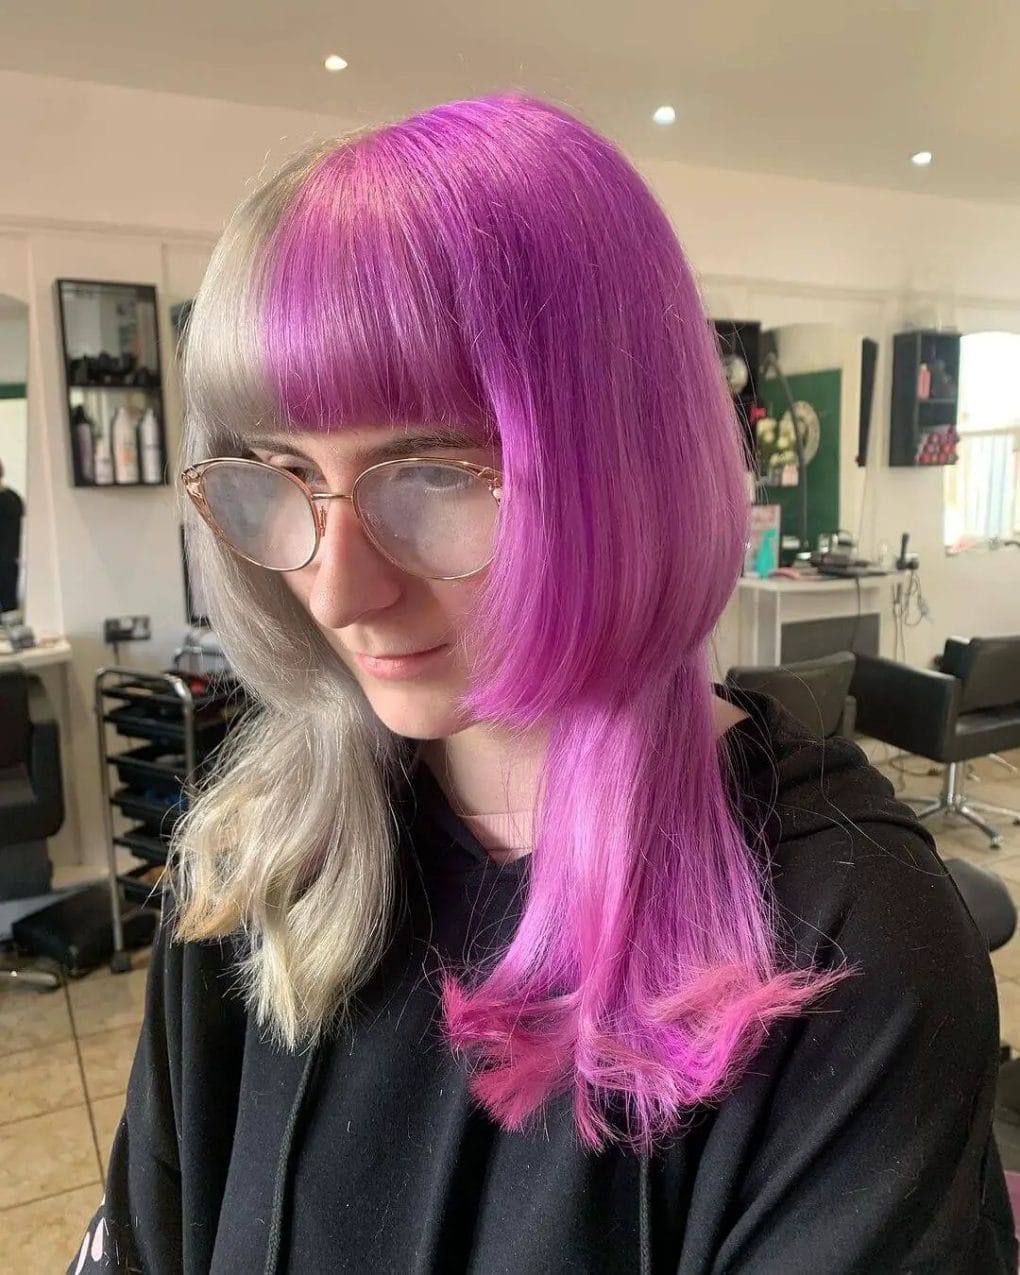 Sleek jellyfish haircut transitioning from vibrant purple roots to soft silver hues with a straight full fringe.